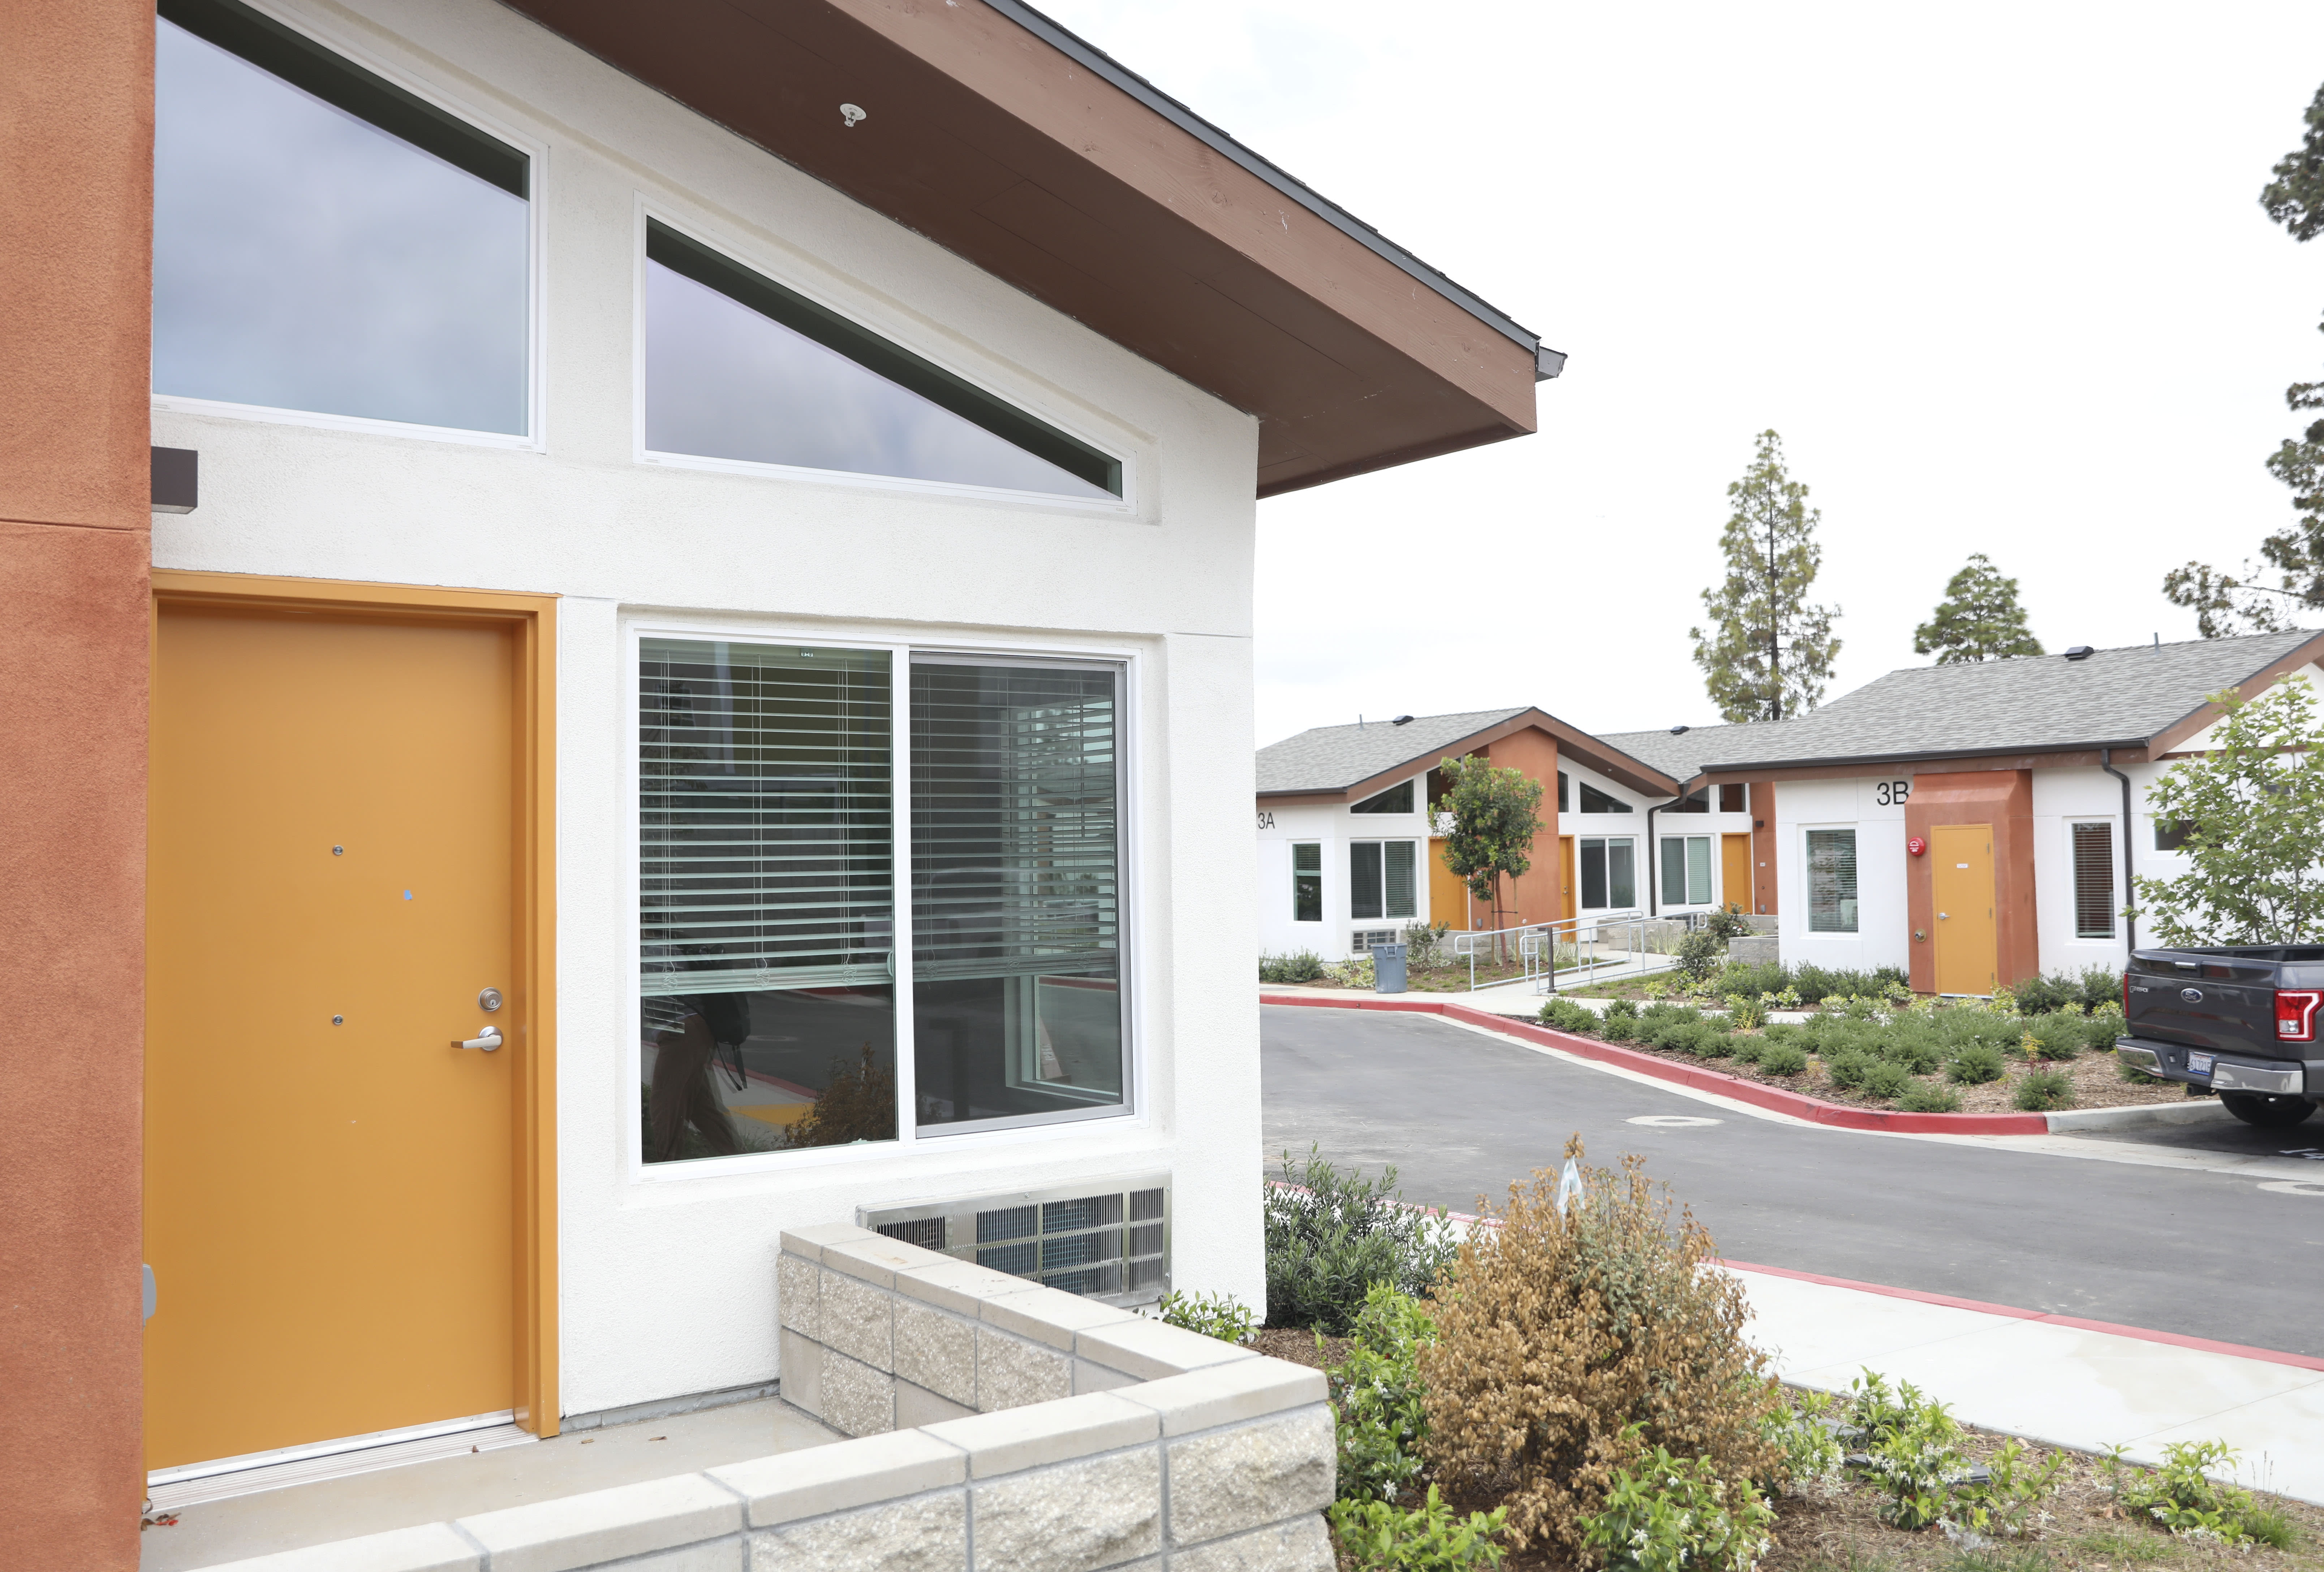 San Diego County to open new affordable housing for older adults amid overwhelming demand